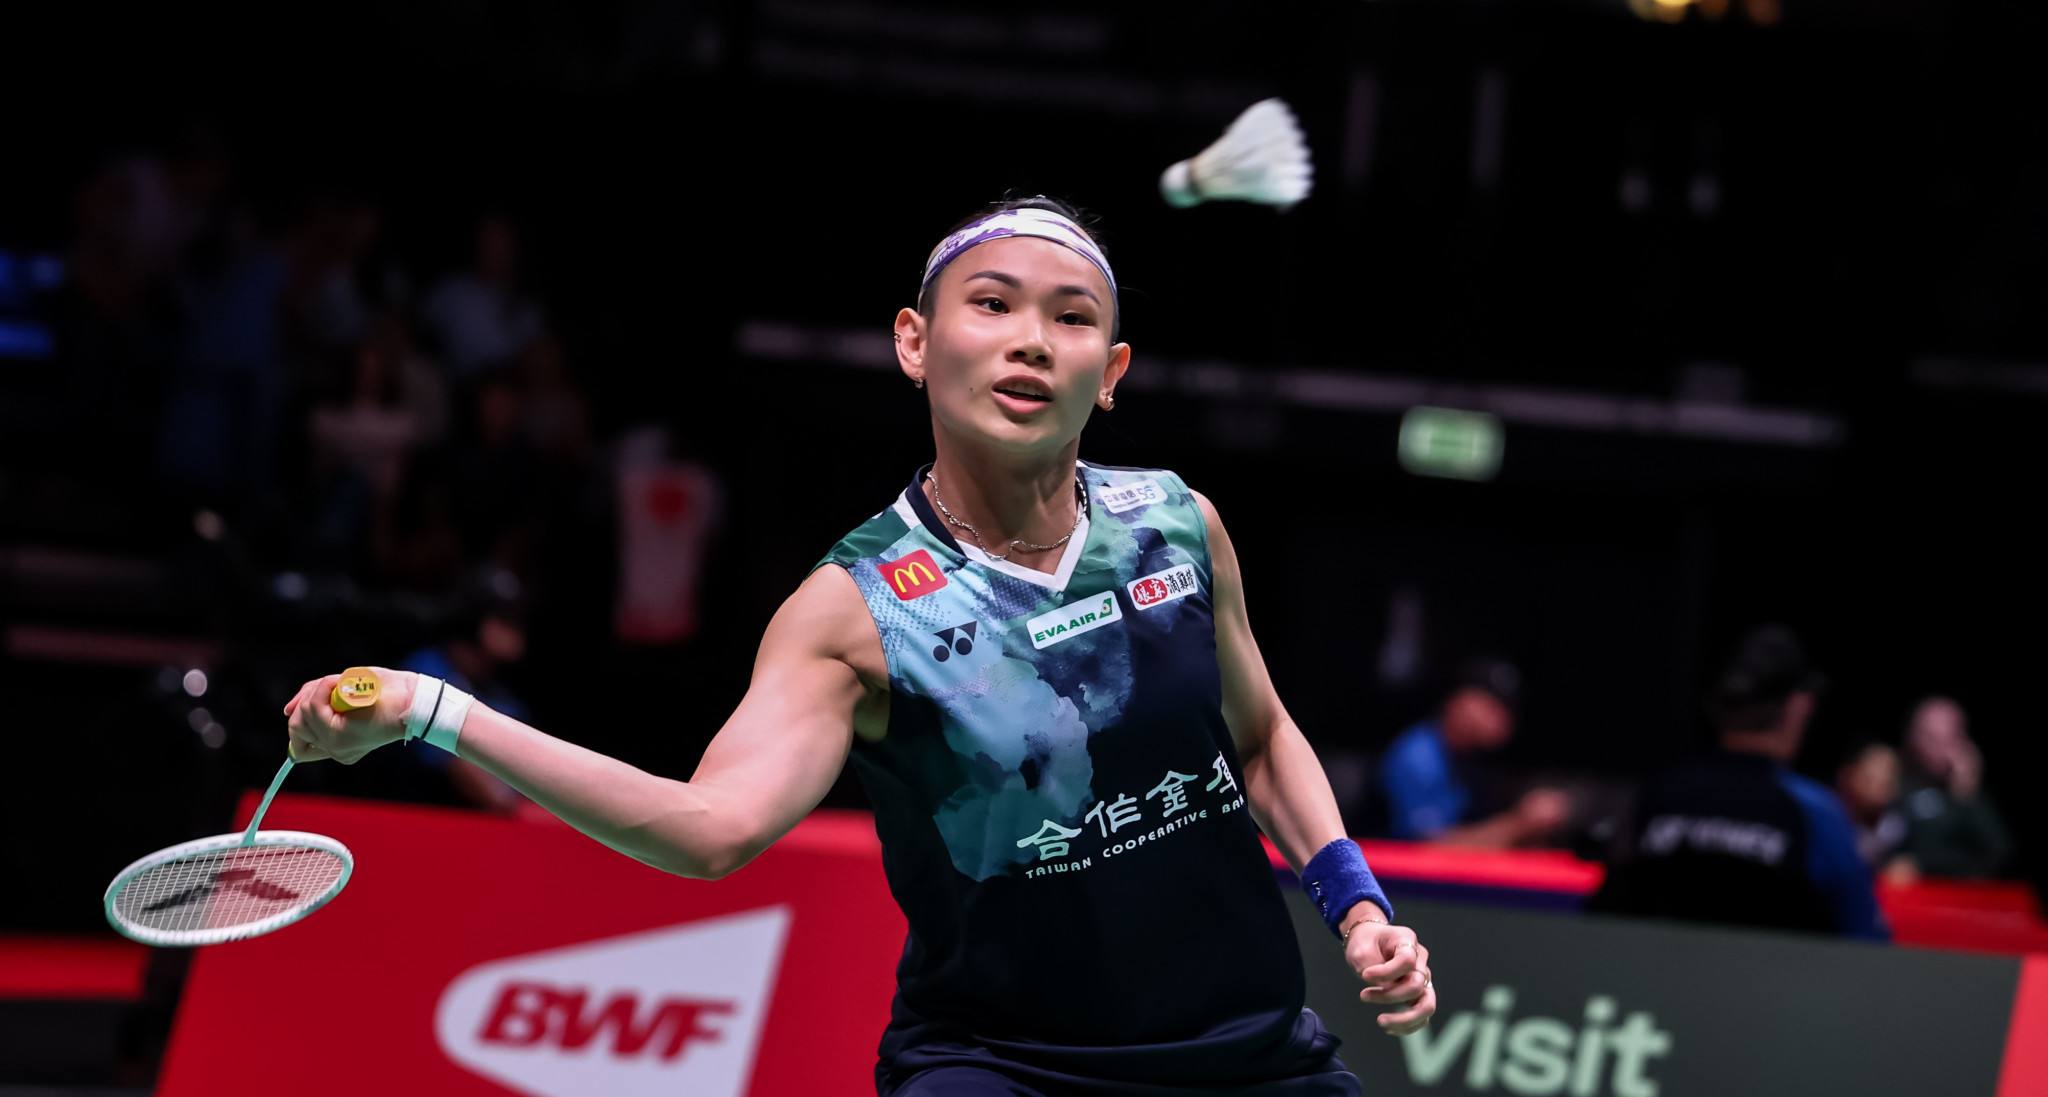 Chinese Taipei’s fourth seed Tai Tzu Ying silenced the home crowd with a three-game victory over Line Kjærsfeldt of Denmark ©Badmintonphoto